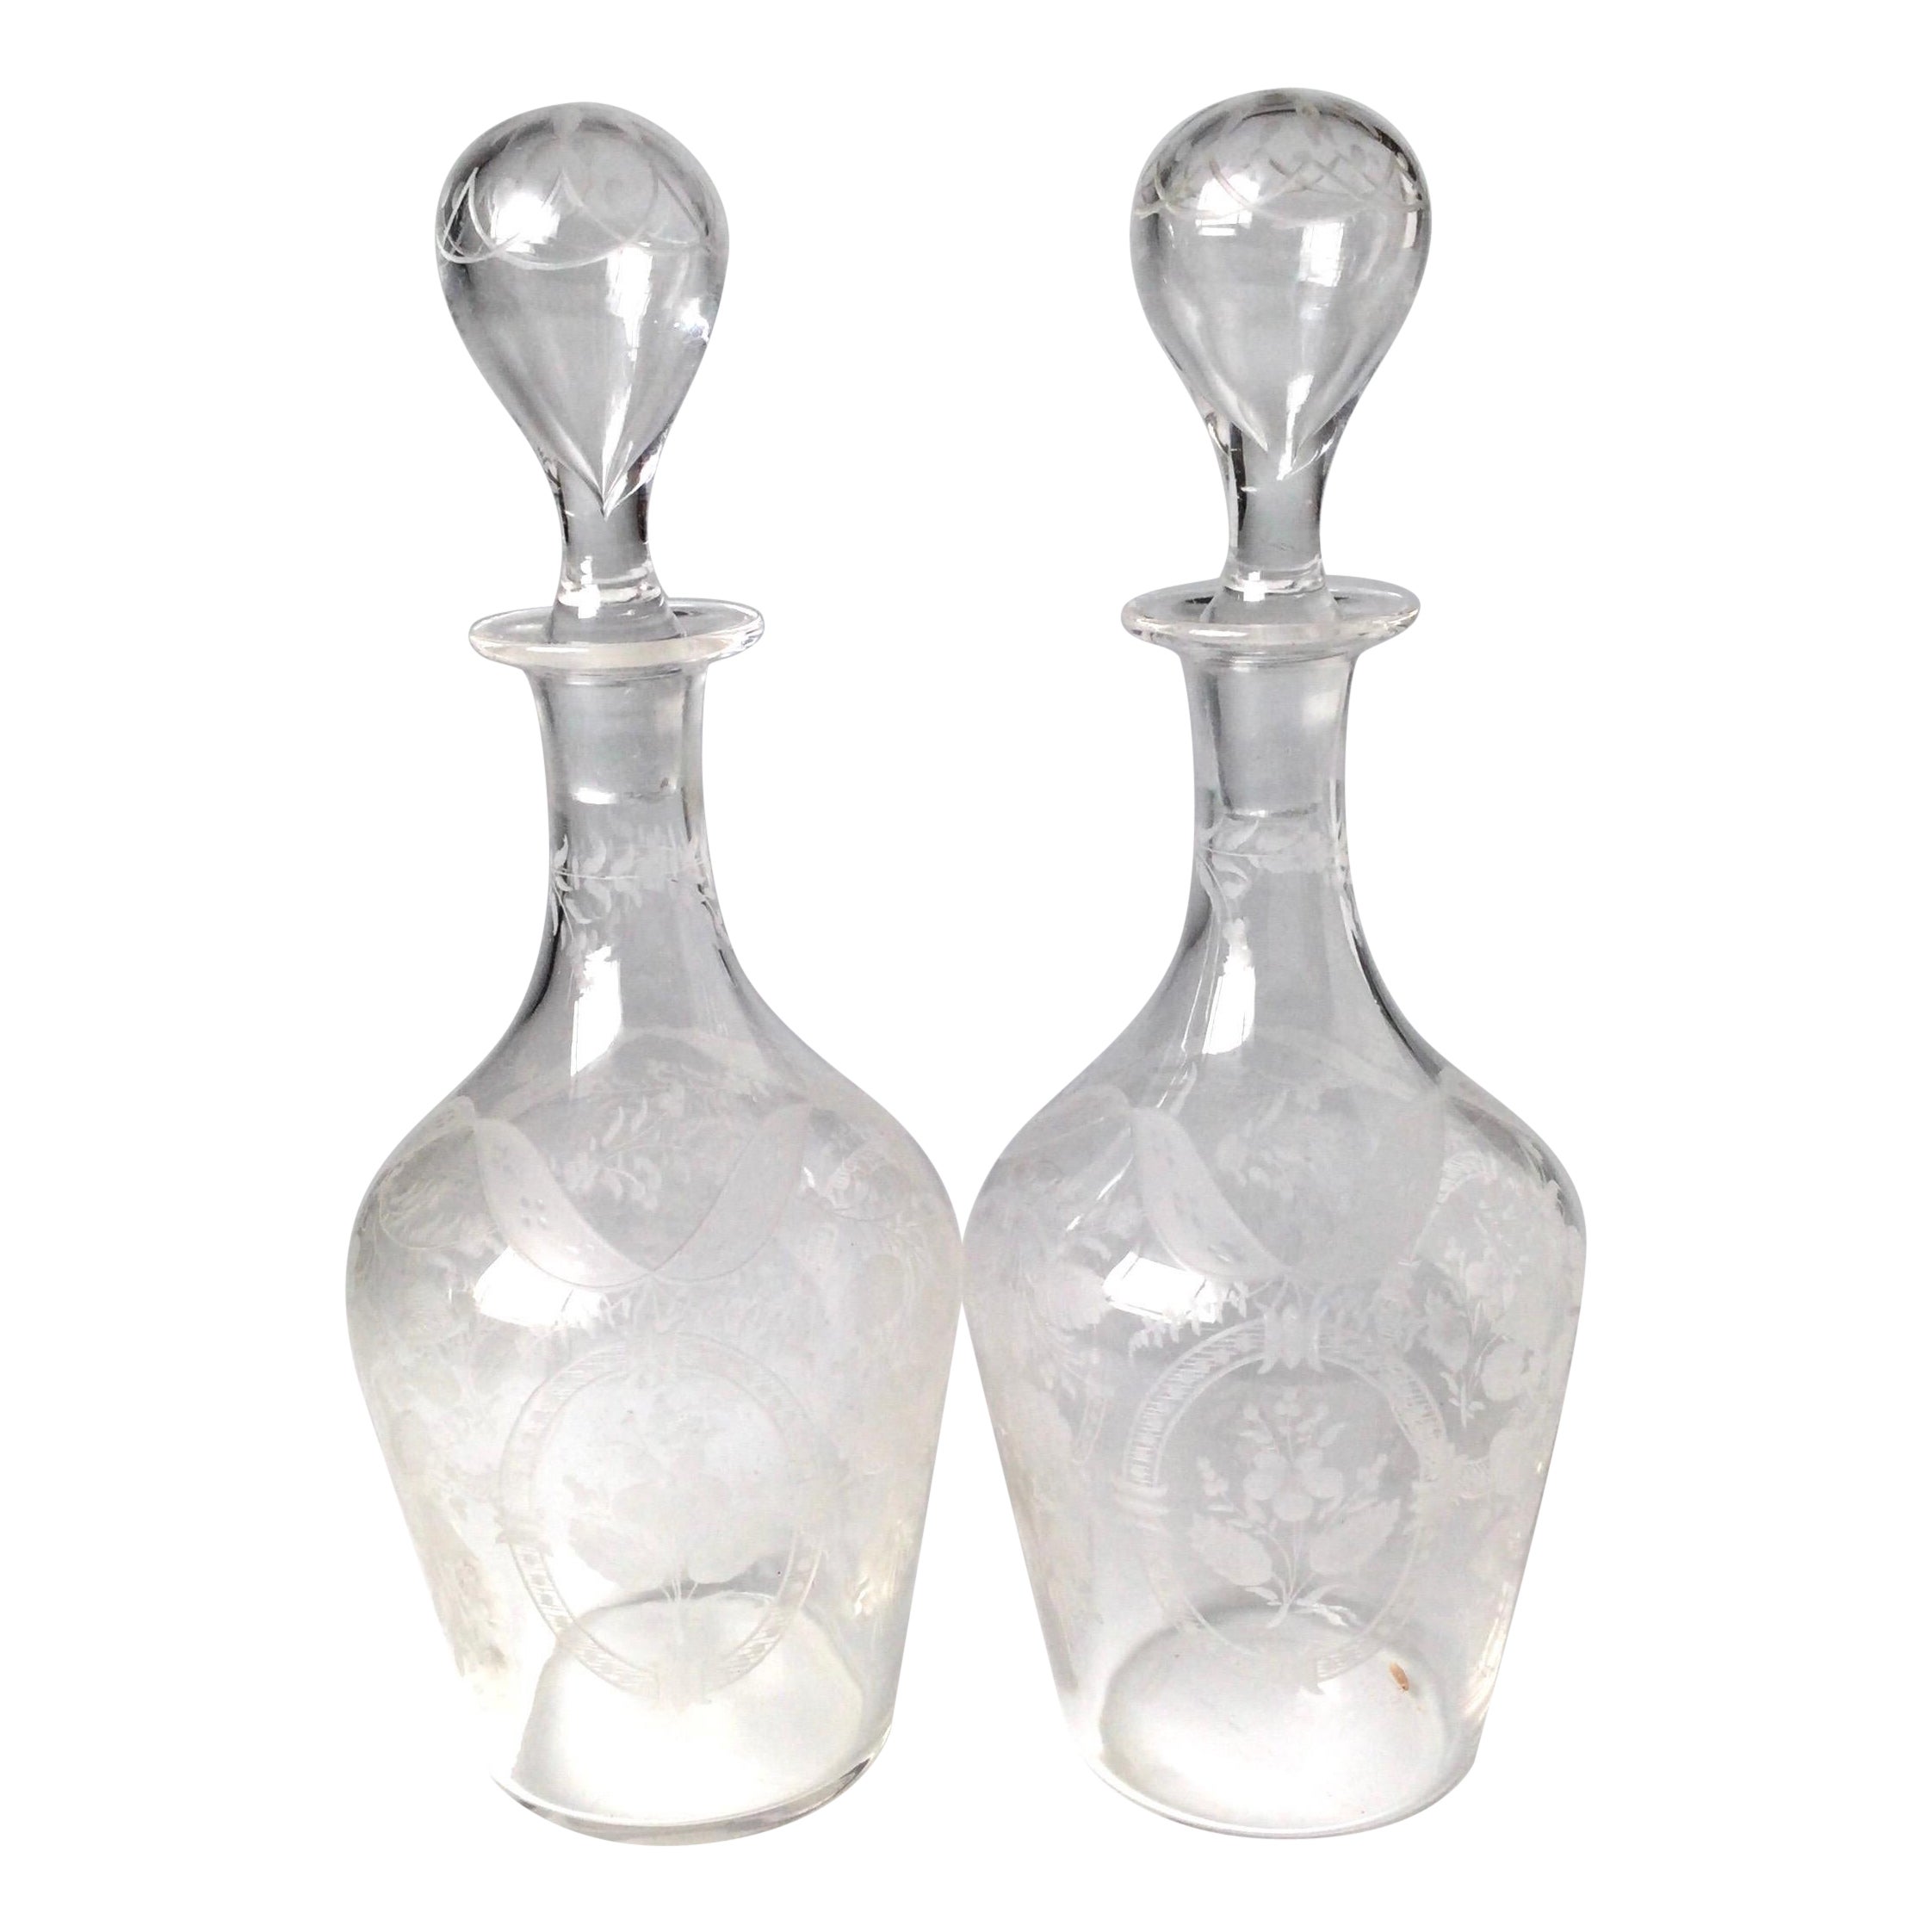 Pair of Diminutive Engraved Hand Blown Decanters